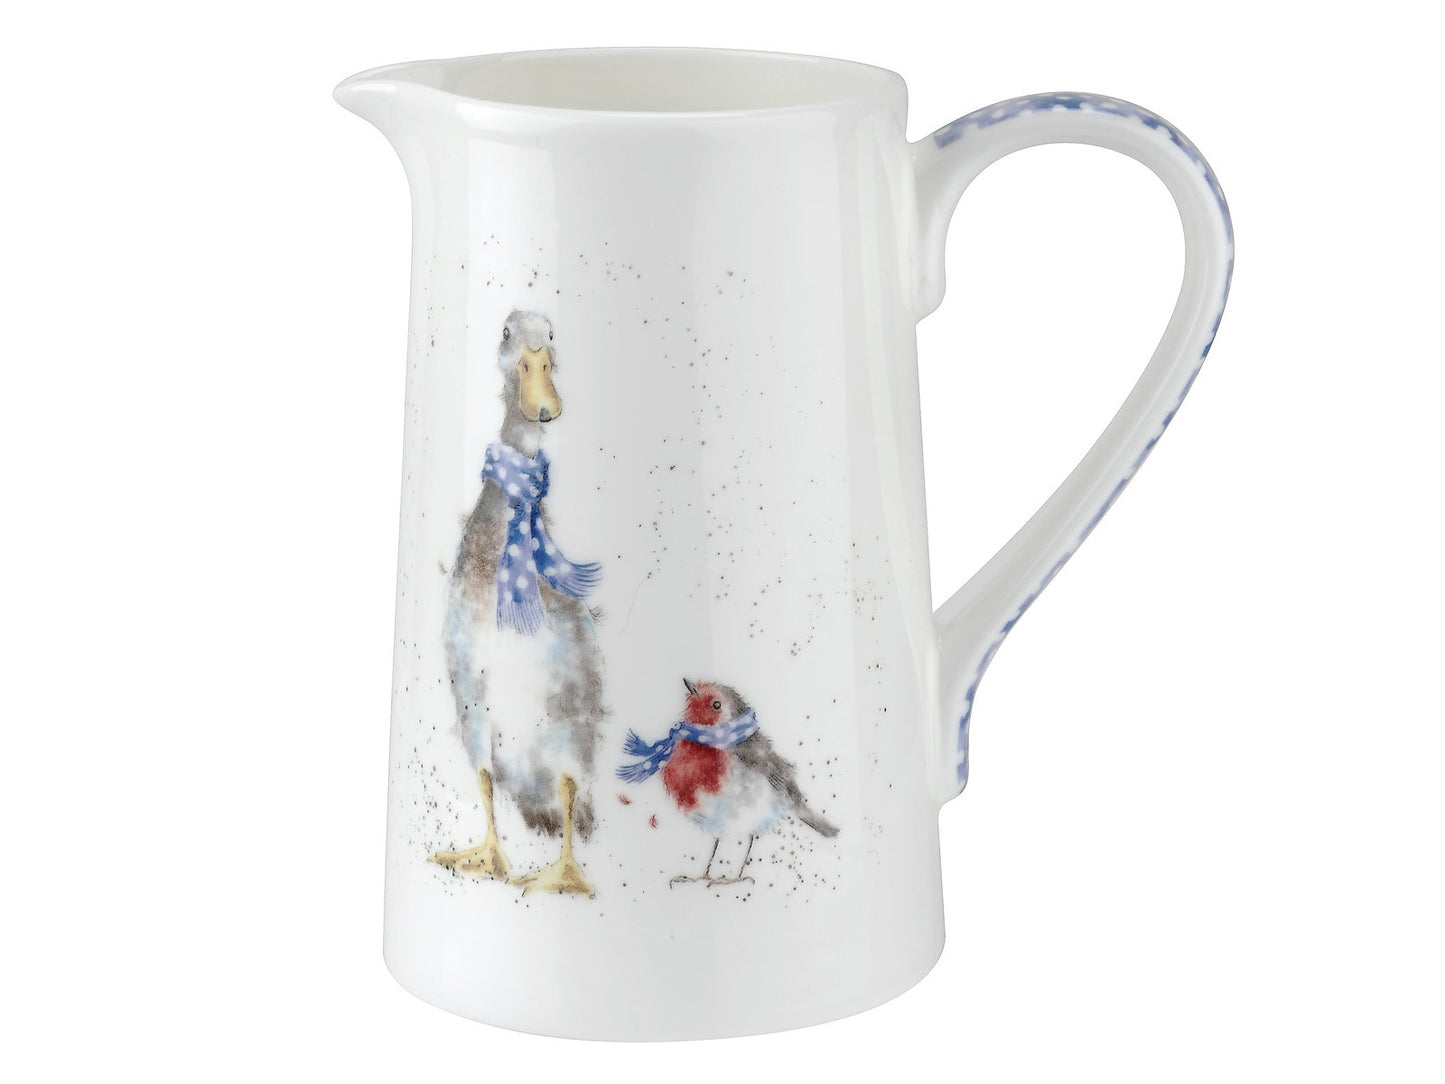 A white fine bone china jug with a blue handle and a duck and robin on it wearing matching scarves